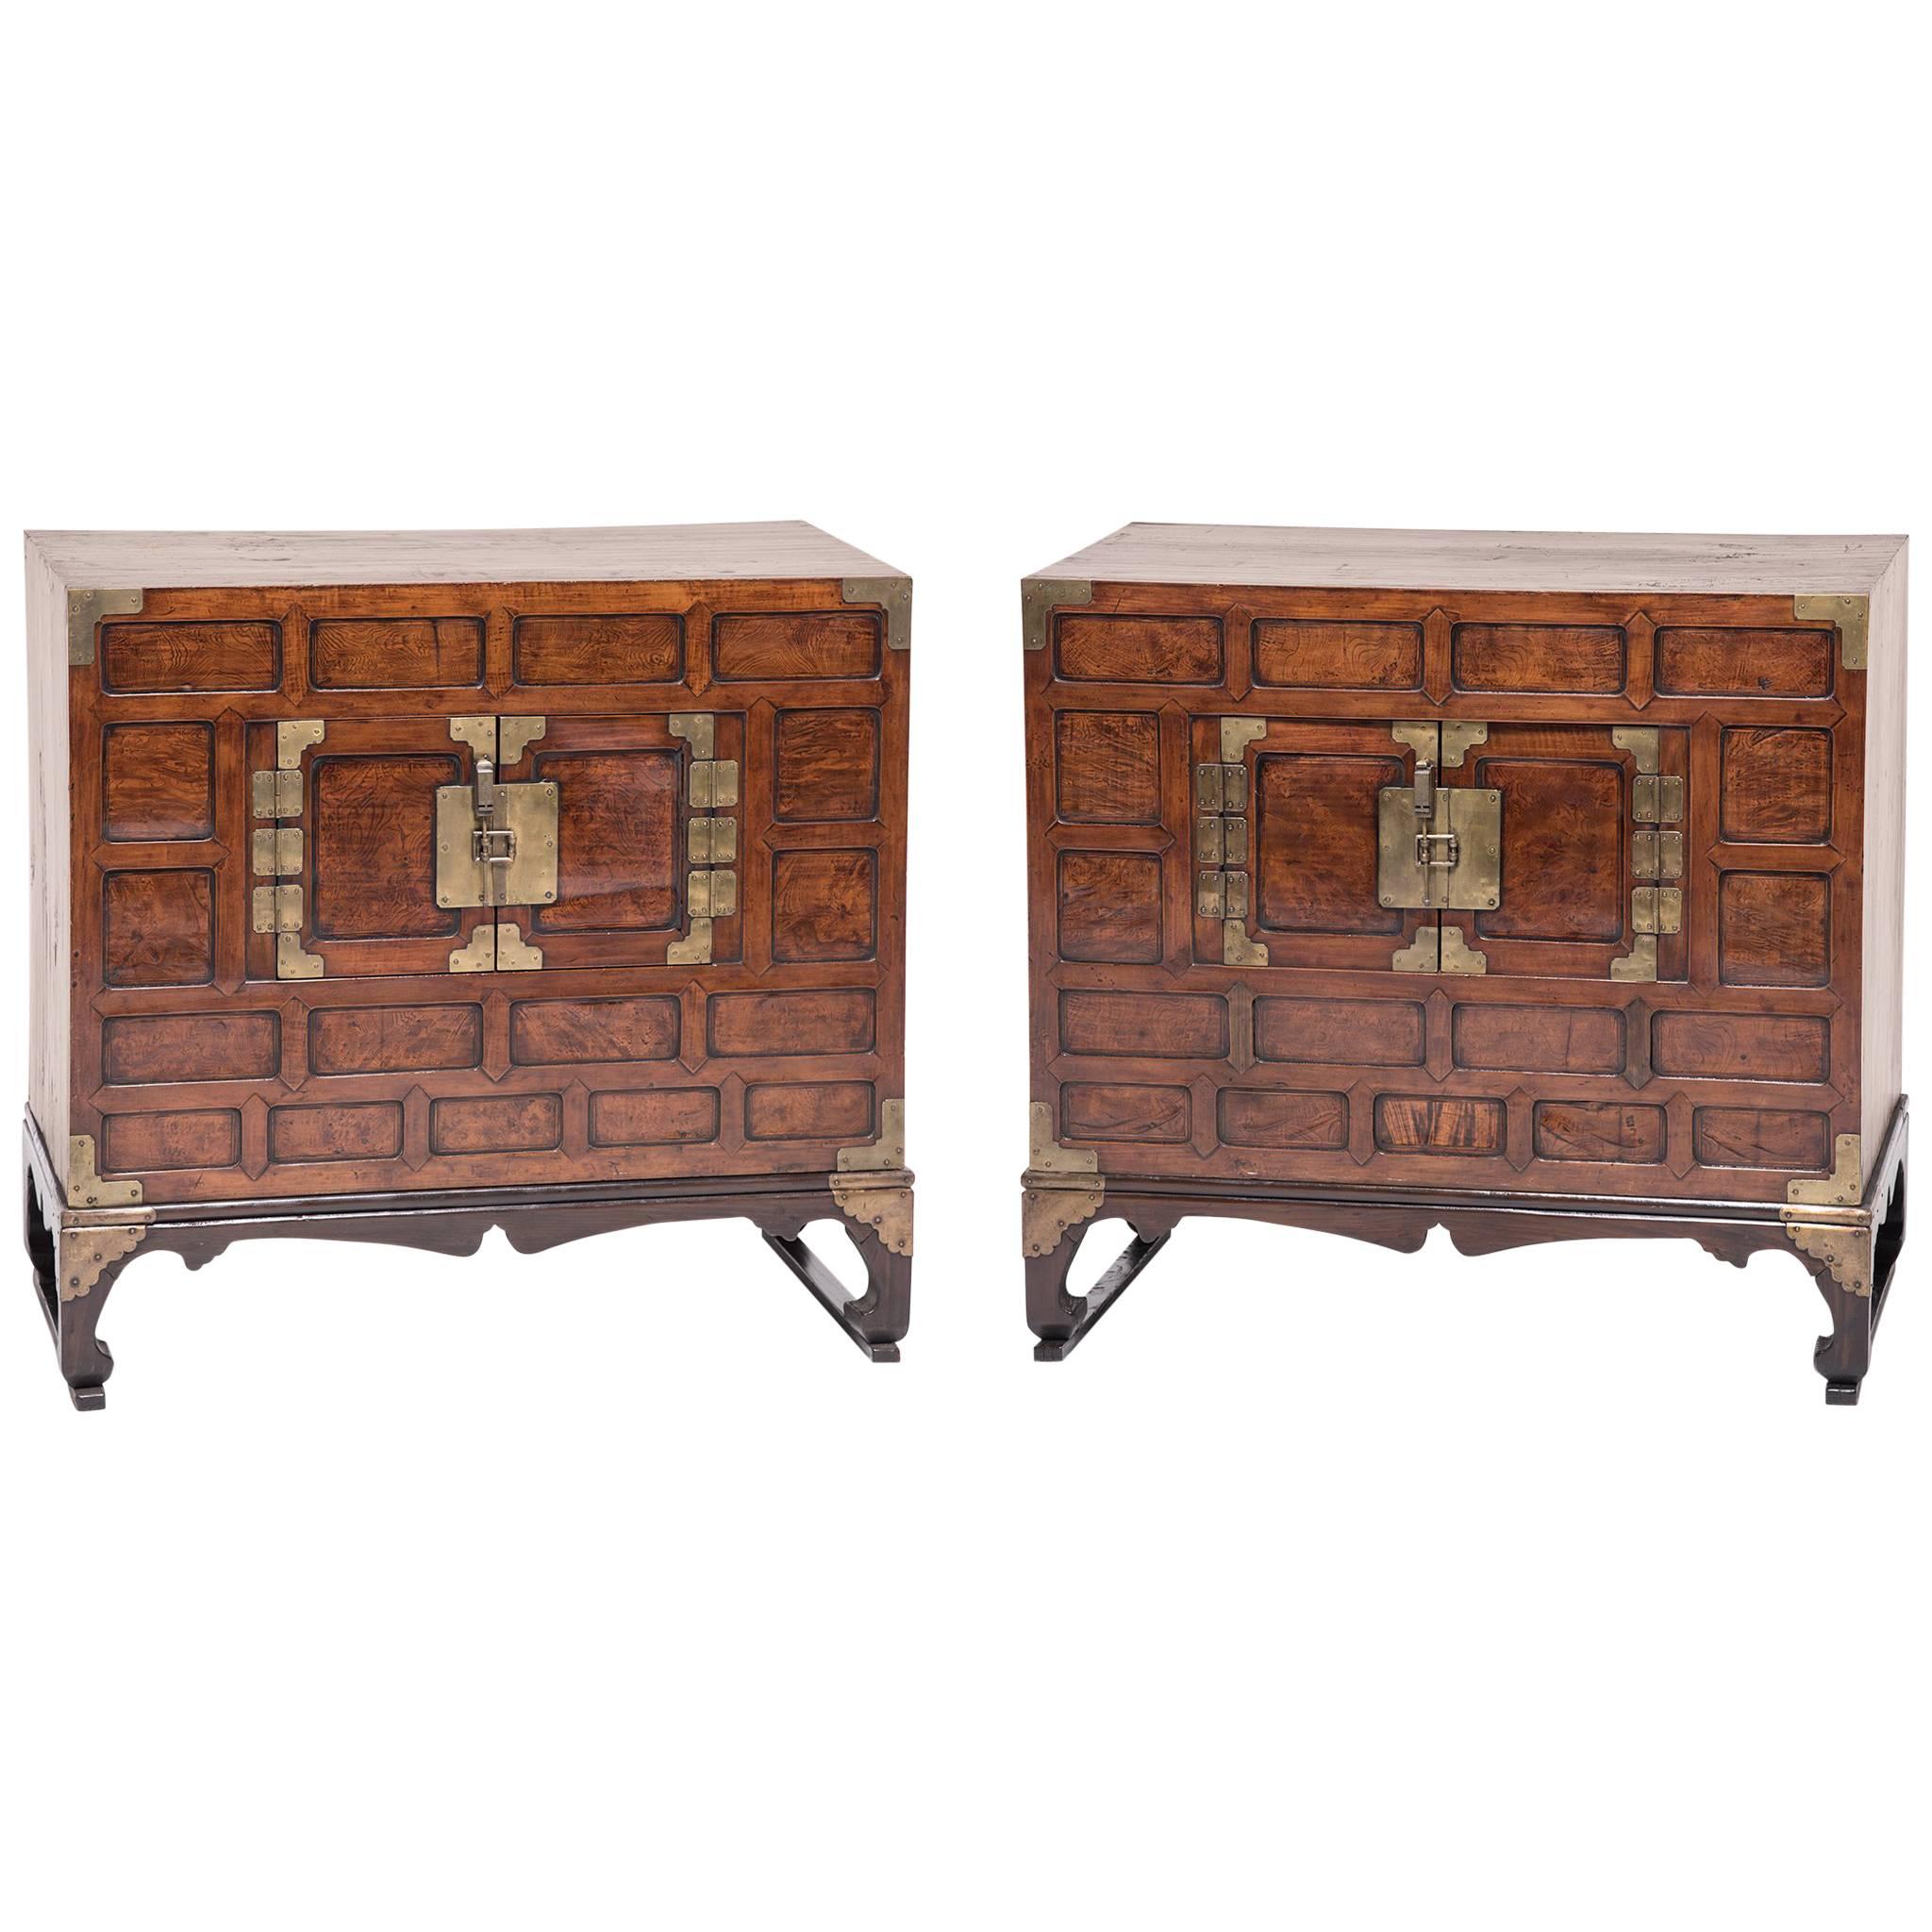 Pair of Korean Two-Door Chests with Stands